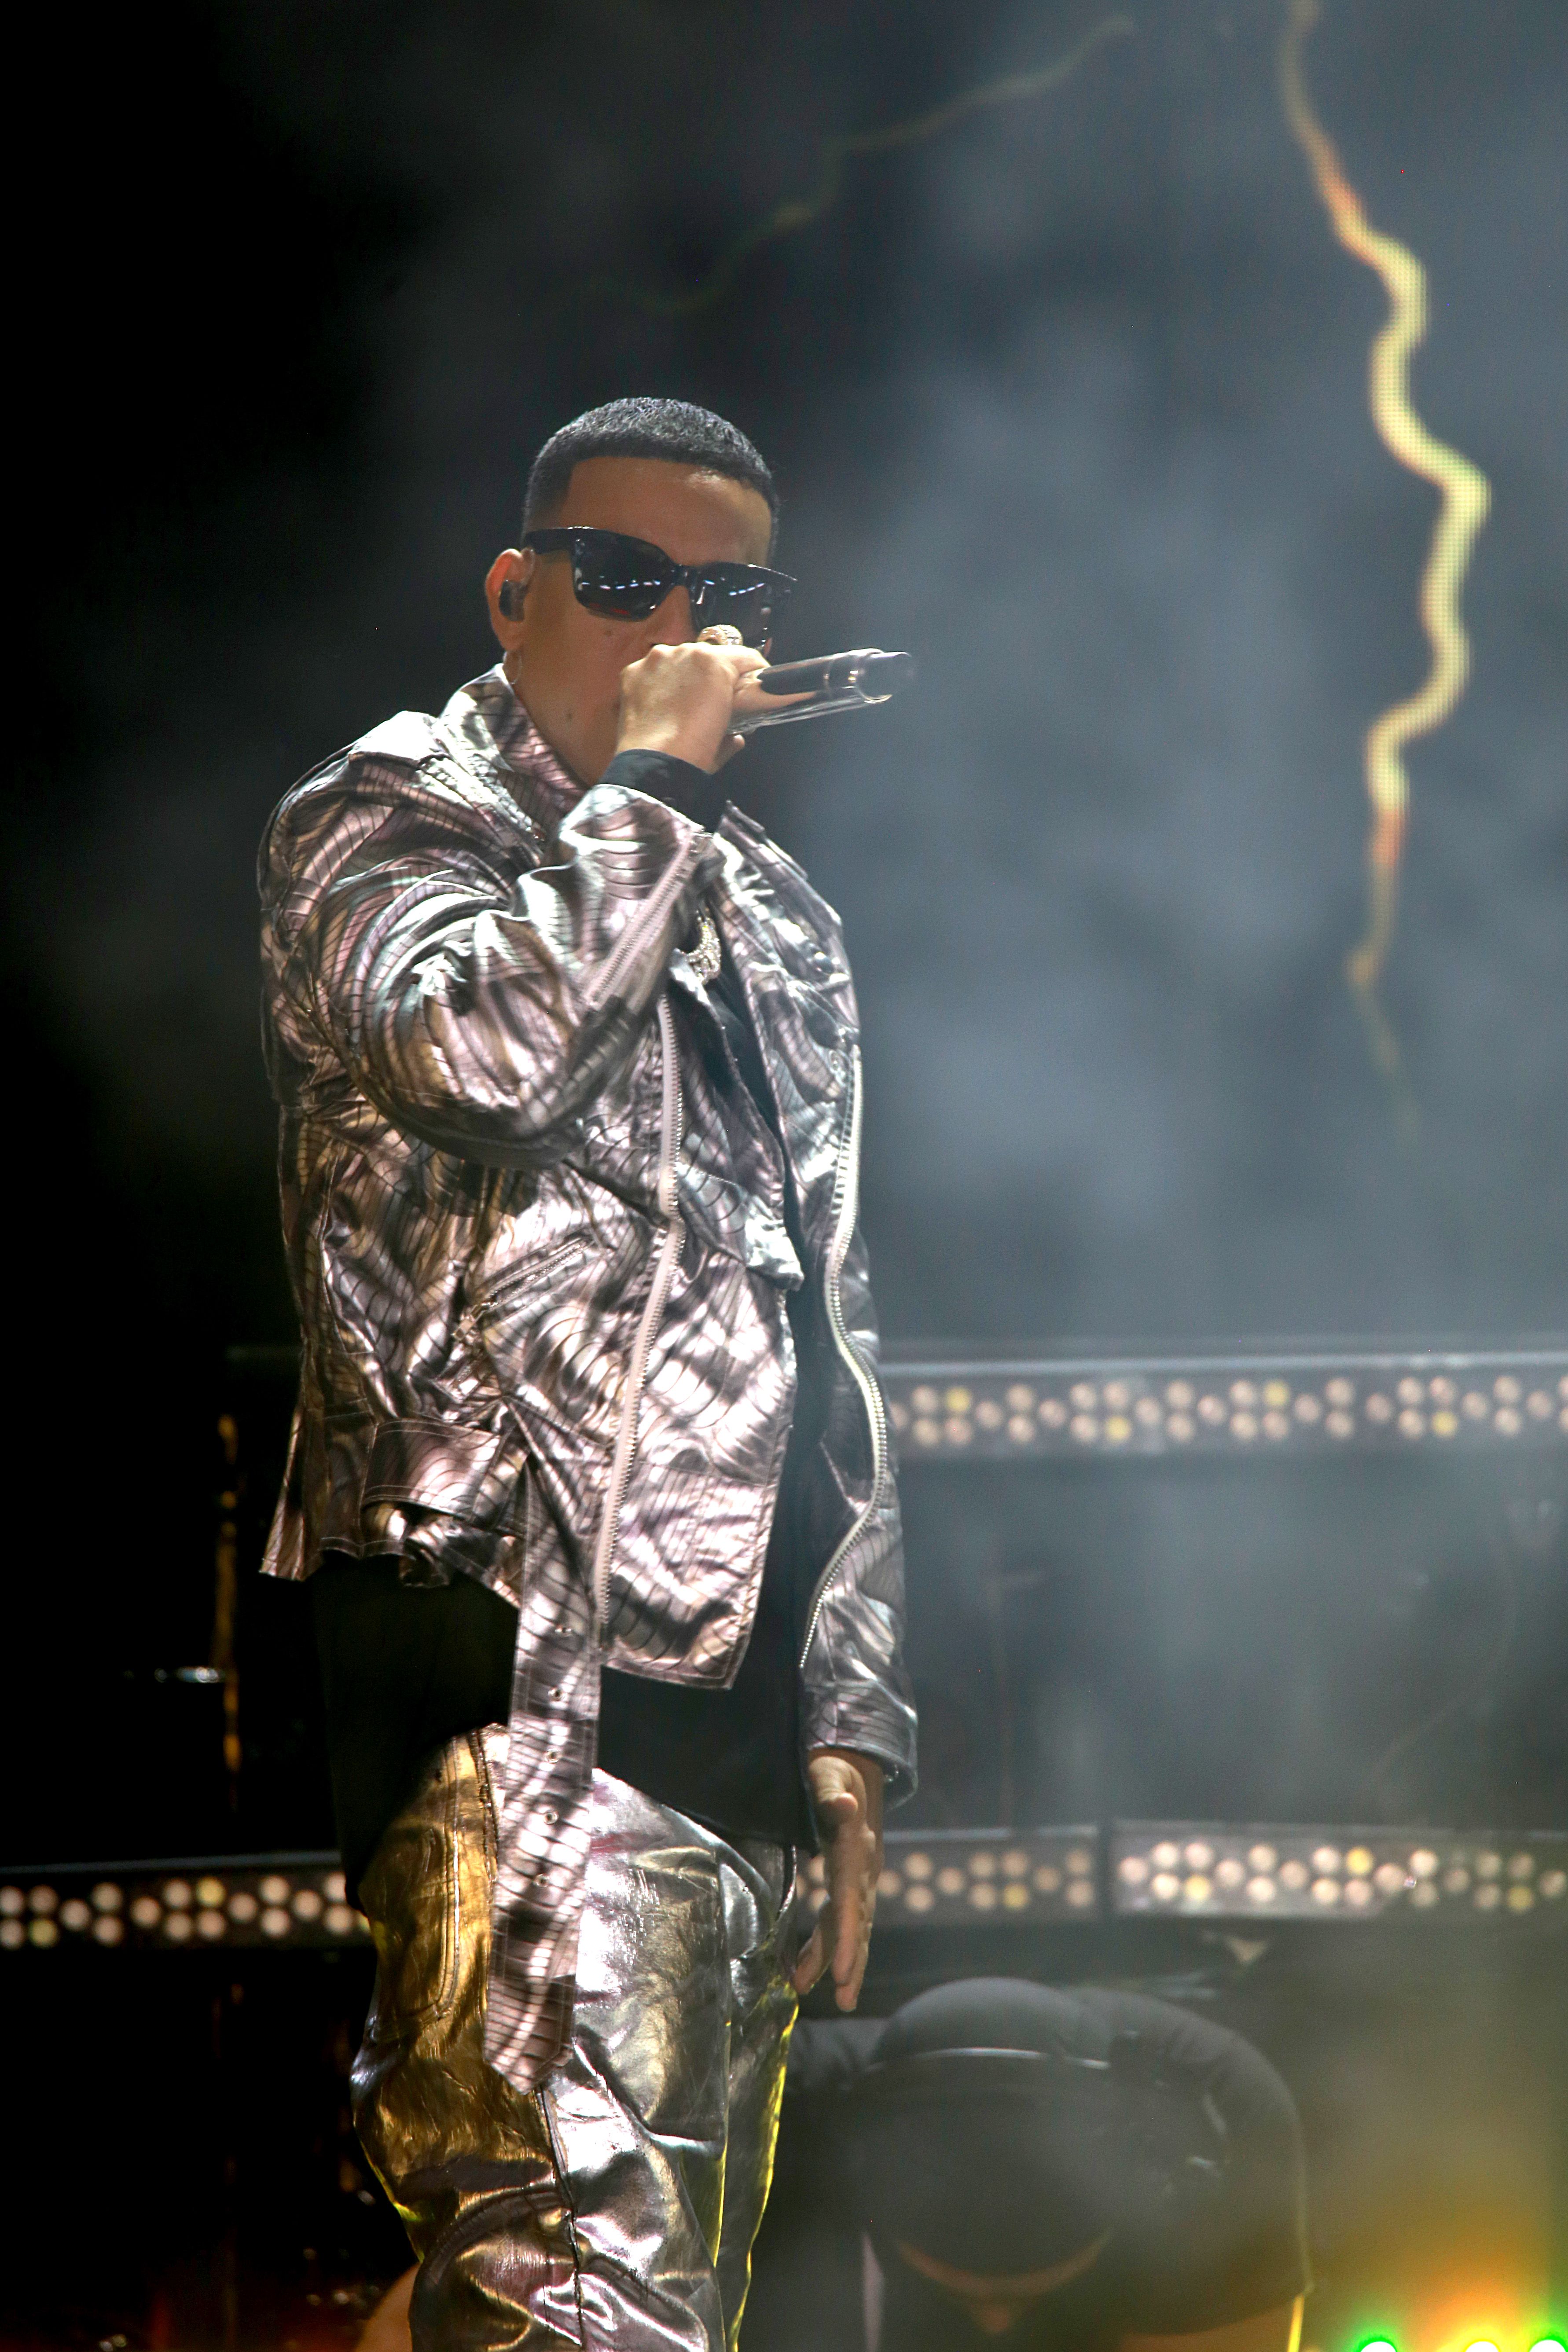 Daddy Yankee Announces Retirement, Plans for Farewell Album and Tour